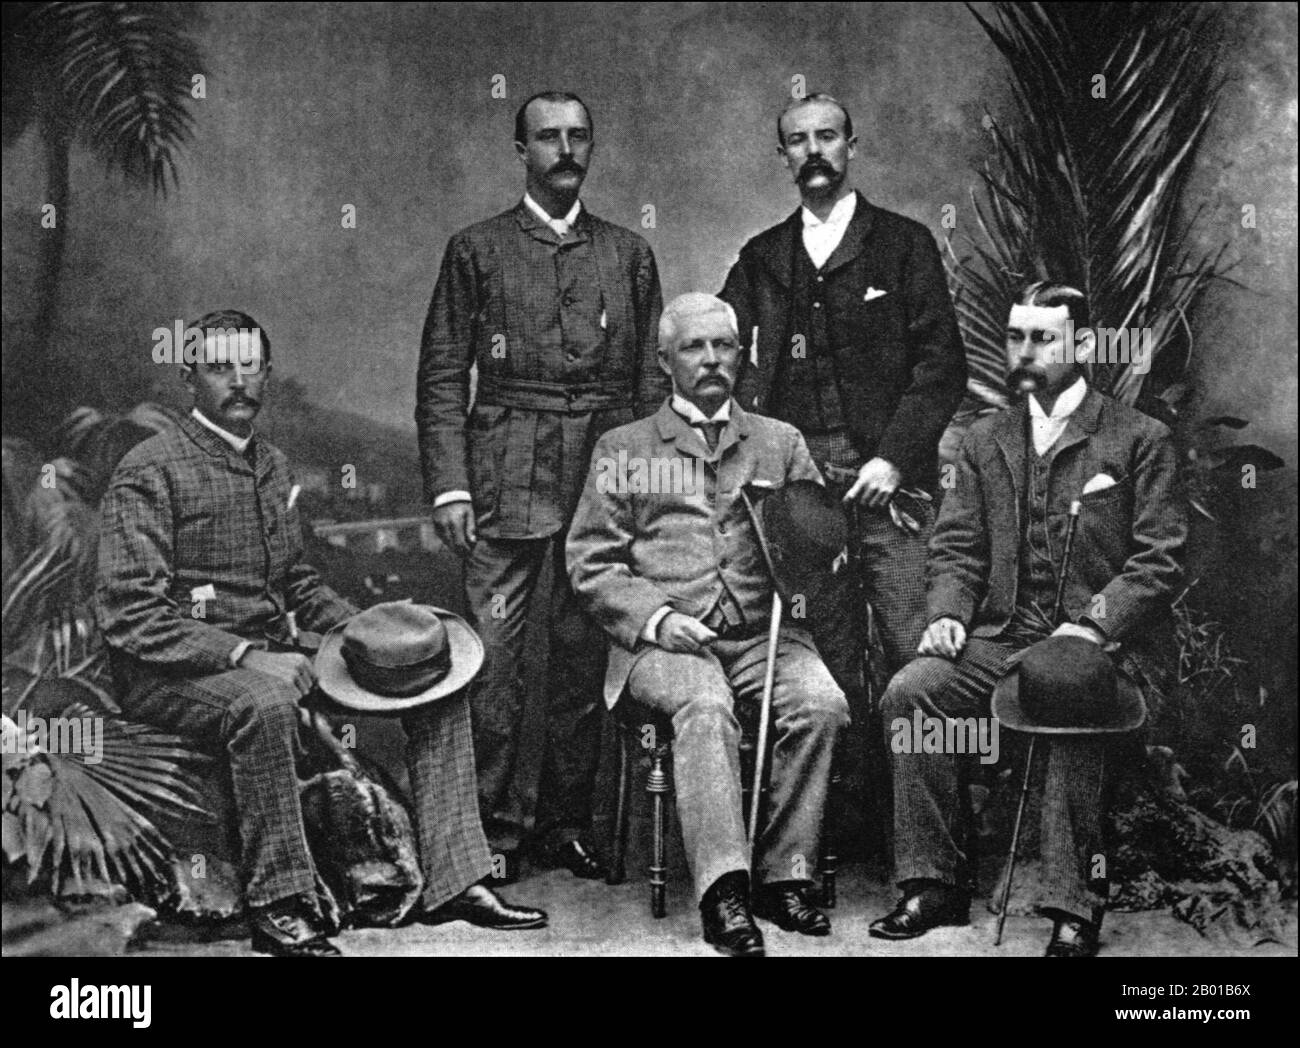 Egypt: Leaders of the Emin Pasha Relief Expedition, with Henry Morton Stanley (28 January 1841 - 10 May 1904) seated centre, Cairo, 1890.  The Emin Pasha Relief Expedition, led by Henry Morton Stanley, was undertaken in 1886 to rescue Emin Pasha, governor of Equatoria, from Madhist forces. The expedition went up the Congo River and then through the Ituri Forest, a very difficult route that resulted in the loss of two-thirds of the expedition.  Stanley met Emin in 1888, and after a year spent in argument and indecision, Emin was convinced to leave for the coast, arriving in Bagamoyo in 1890. Stock Photo